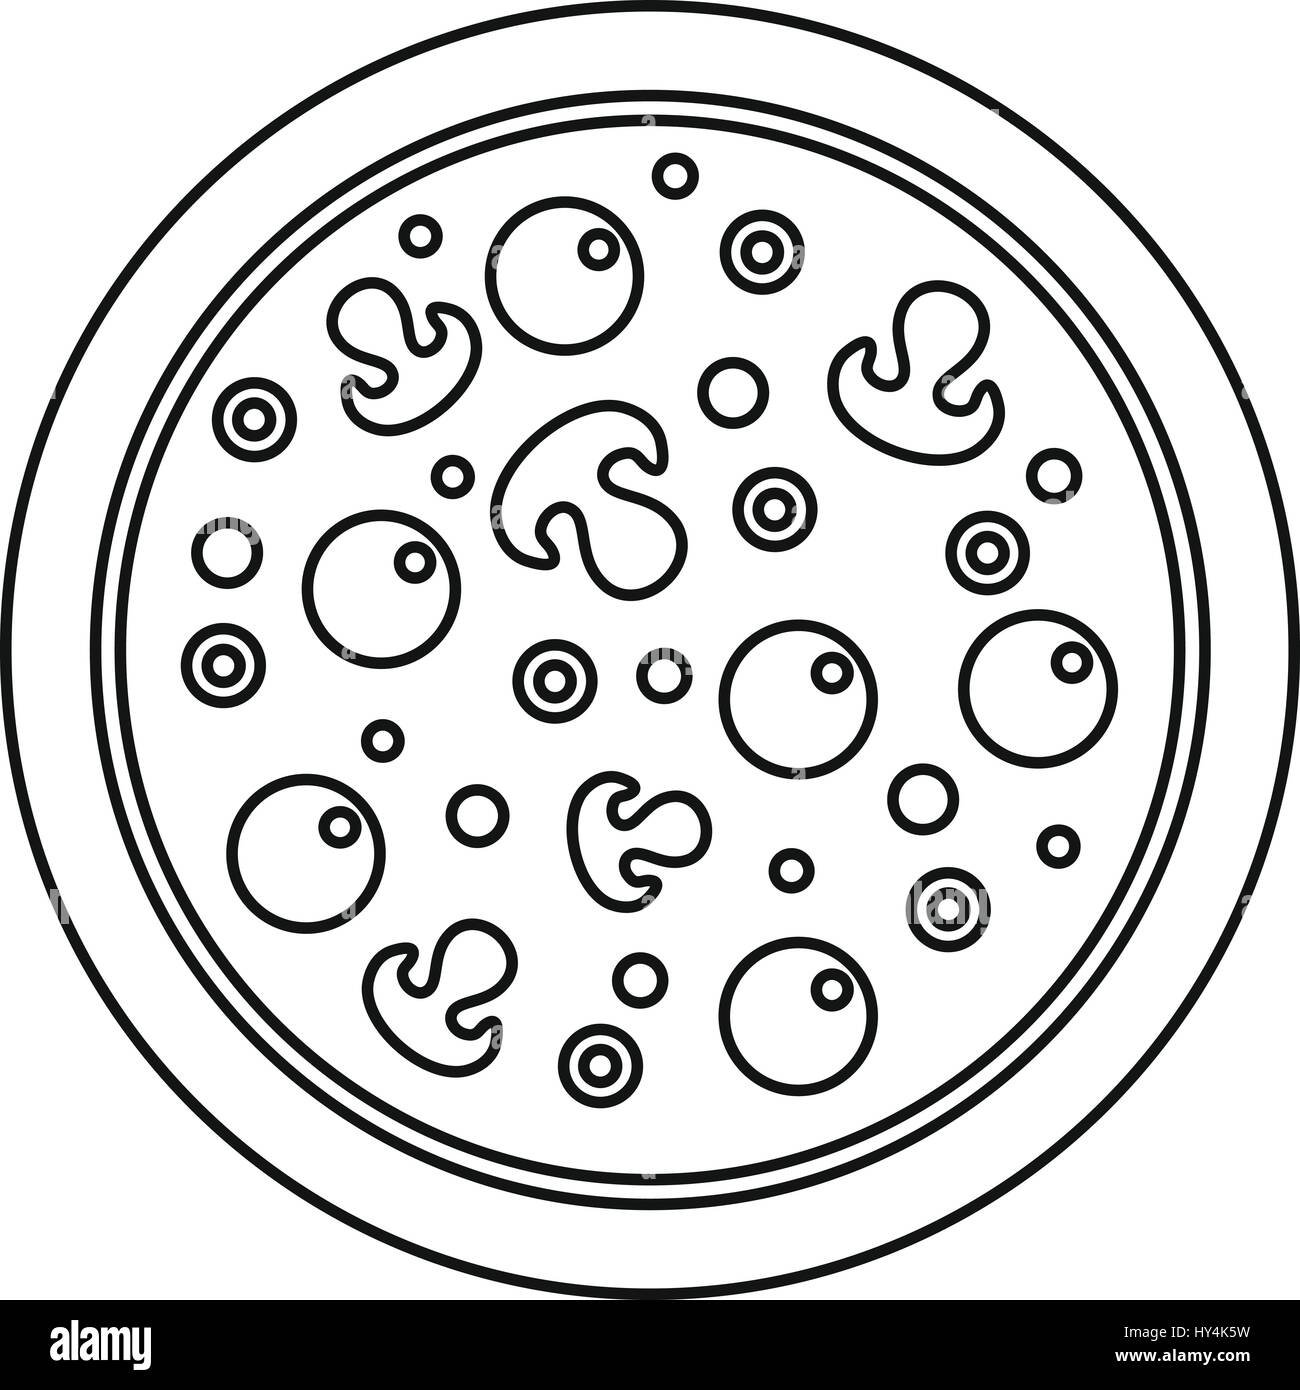 Pizza with olives and mushrooms and egg yolks icon Stock Vector